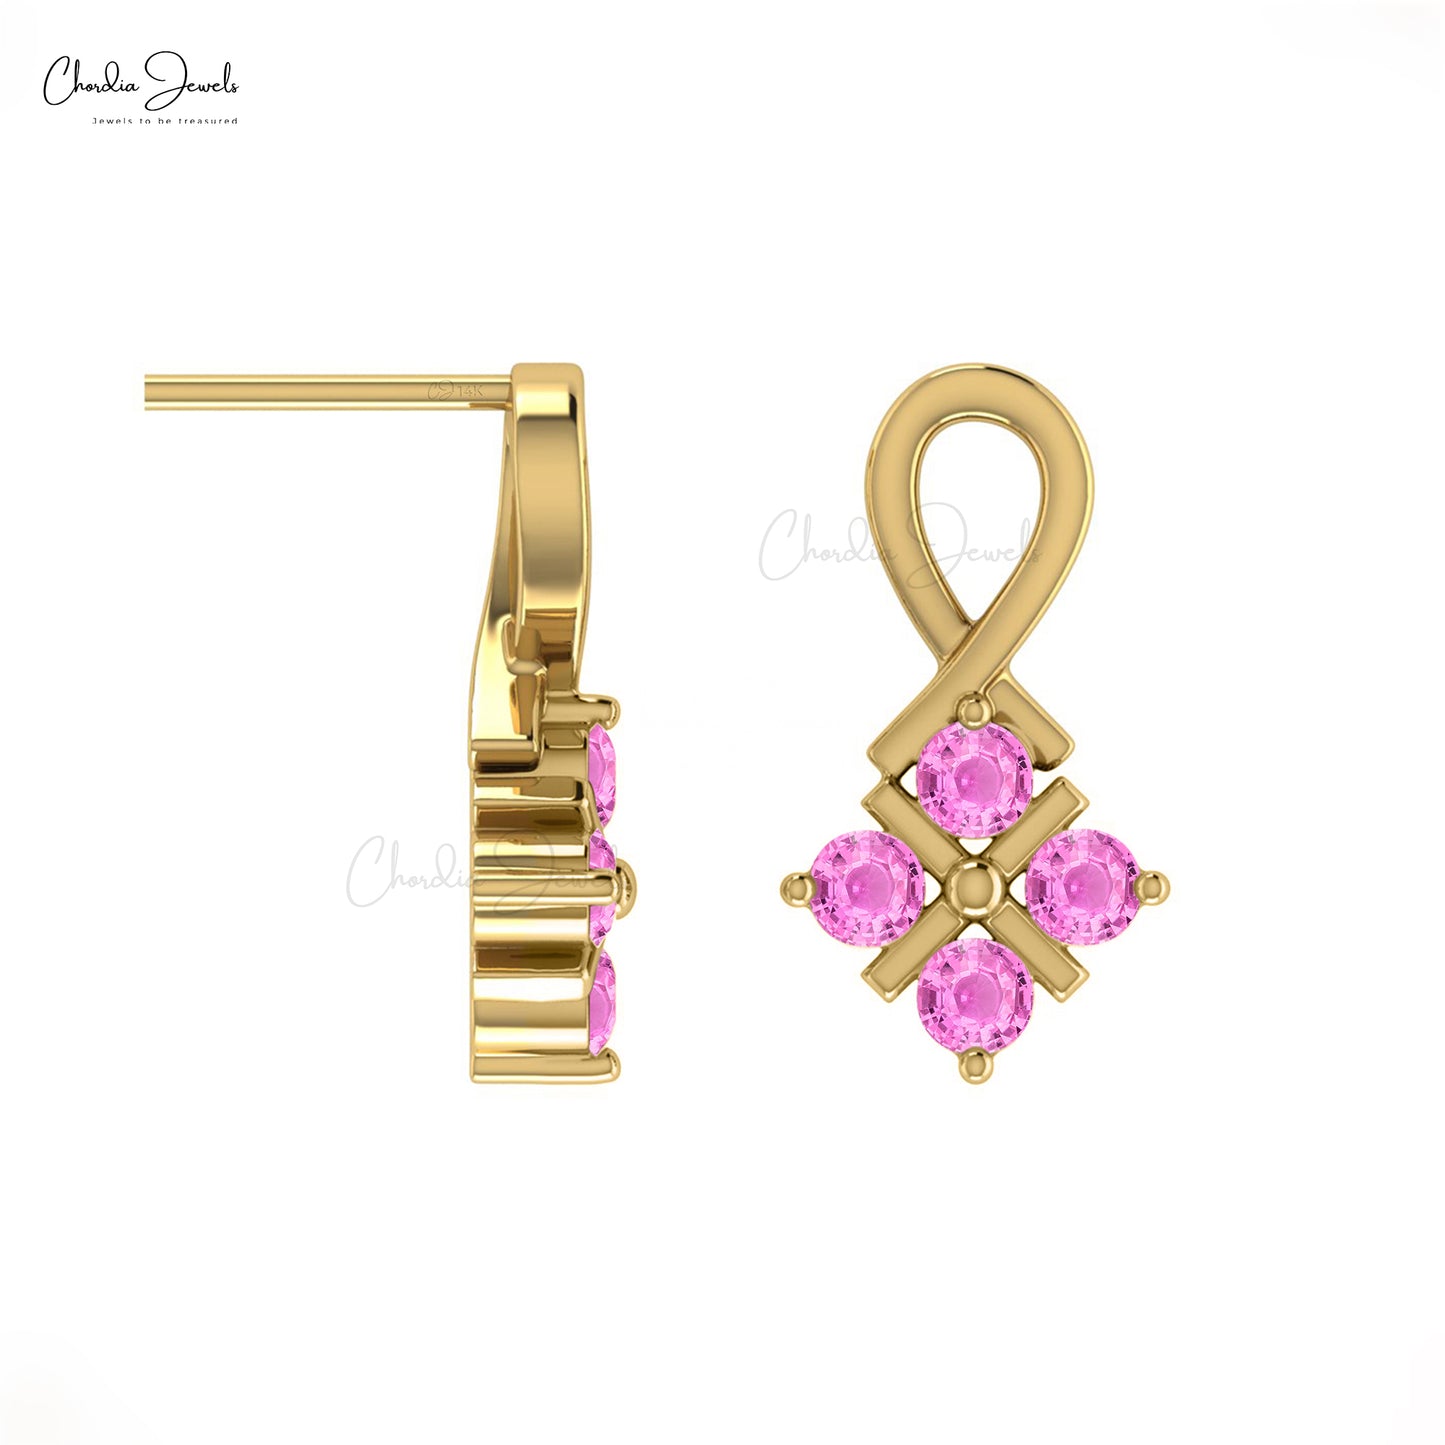 Twisted Studs Earring In 14k Solid Gold Natural Pink Sapphire Gemstone Dainty Earrings